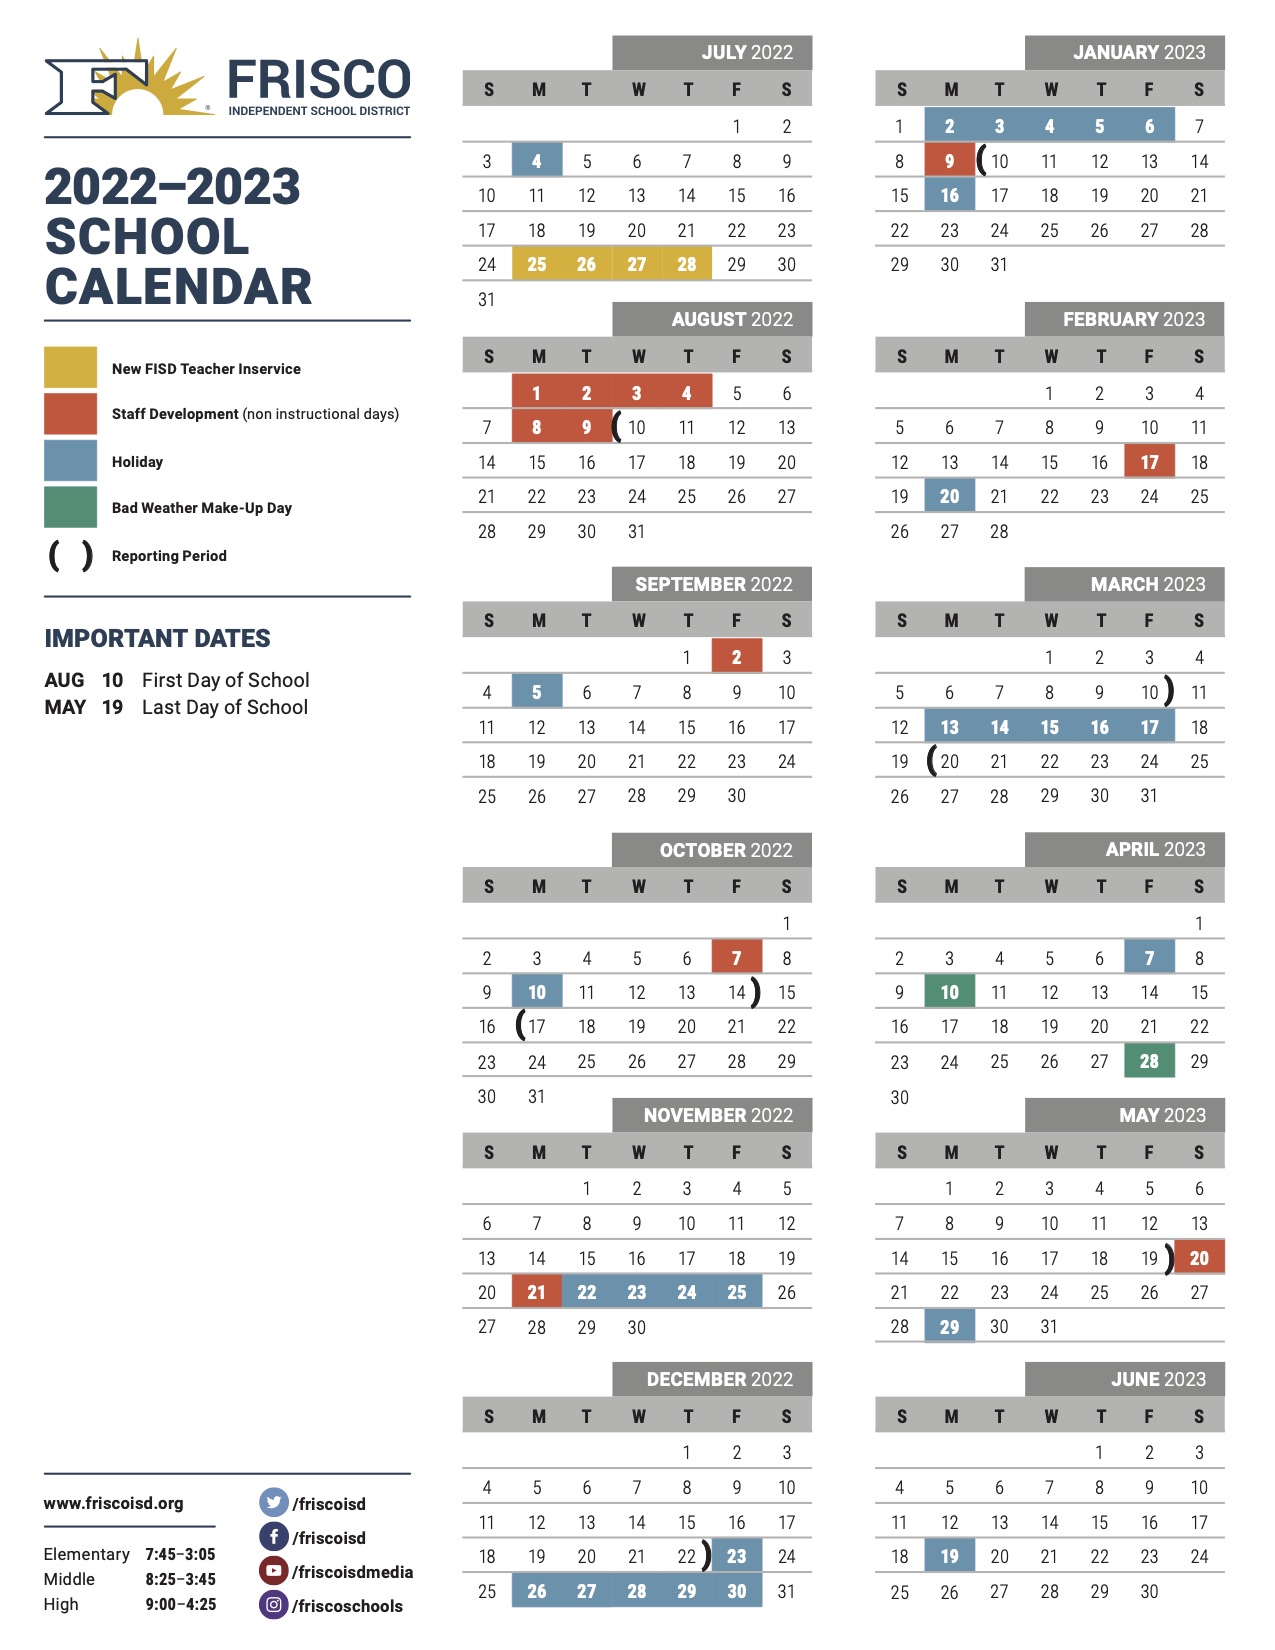 Frisco Isd Calendar 2022 2023 Frisco Isd On Twitter: "The Frisco Isd Academic Calendar Has Been Approved  For The 2022-23 School Year. Check Out Https://T.co/Jlvoekeccp For An  Overview Of The Calendar. Https://T.co/C8Gs8Lflru" / Twitter